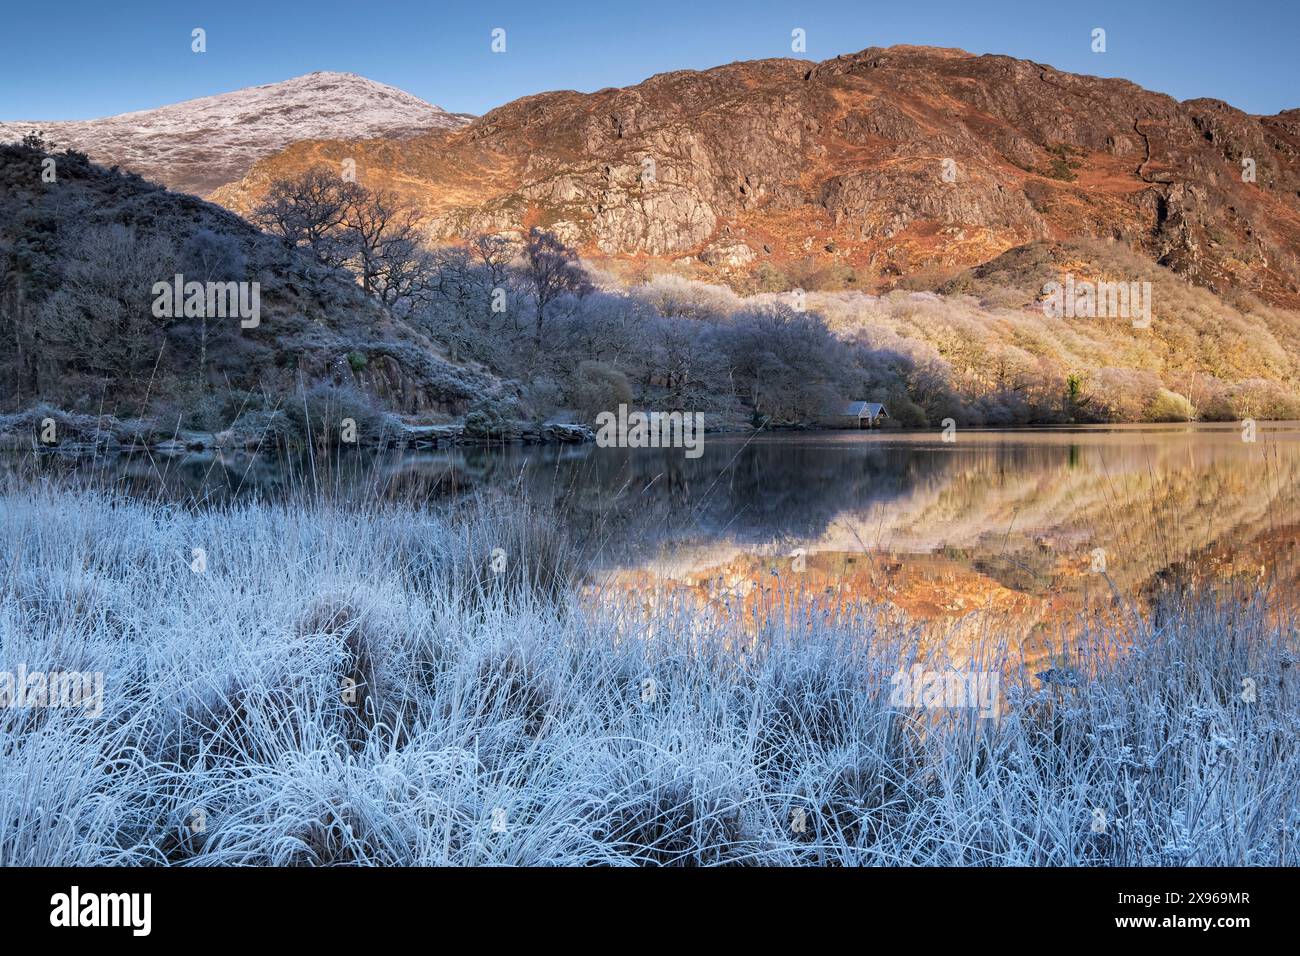 Freezing conditions at Llyn Dinas in winter, near Beddgelert, Snowdonia National Park (Eryri), North Wales, United Kingdom, Europe Stock Photo